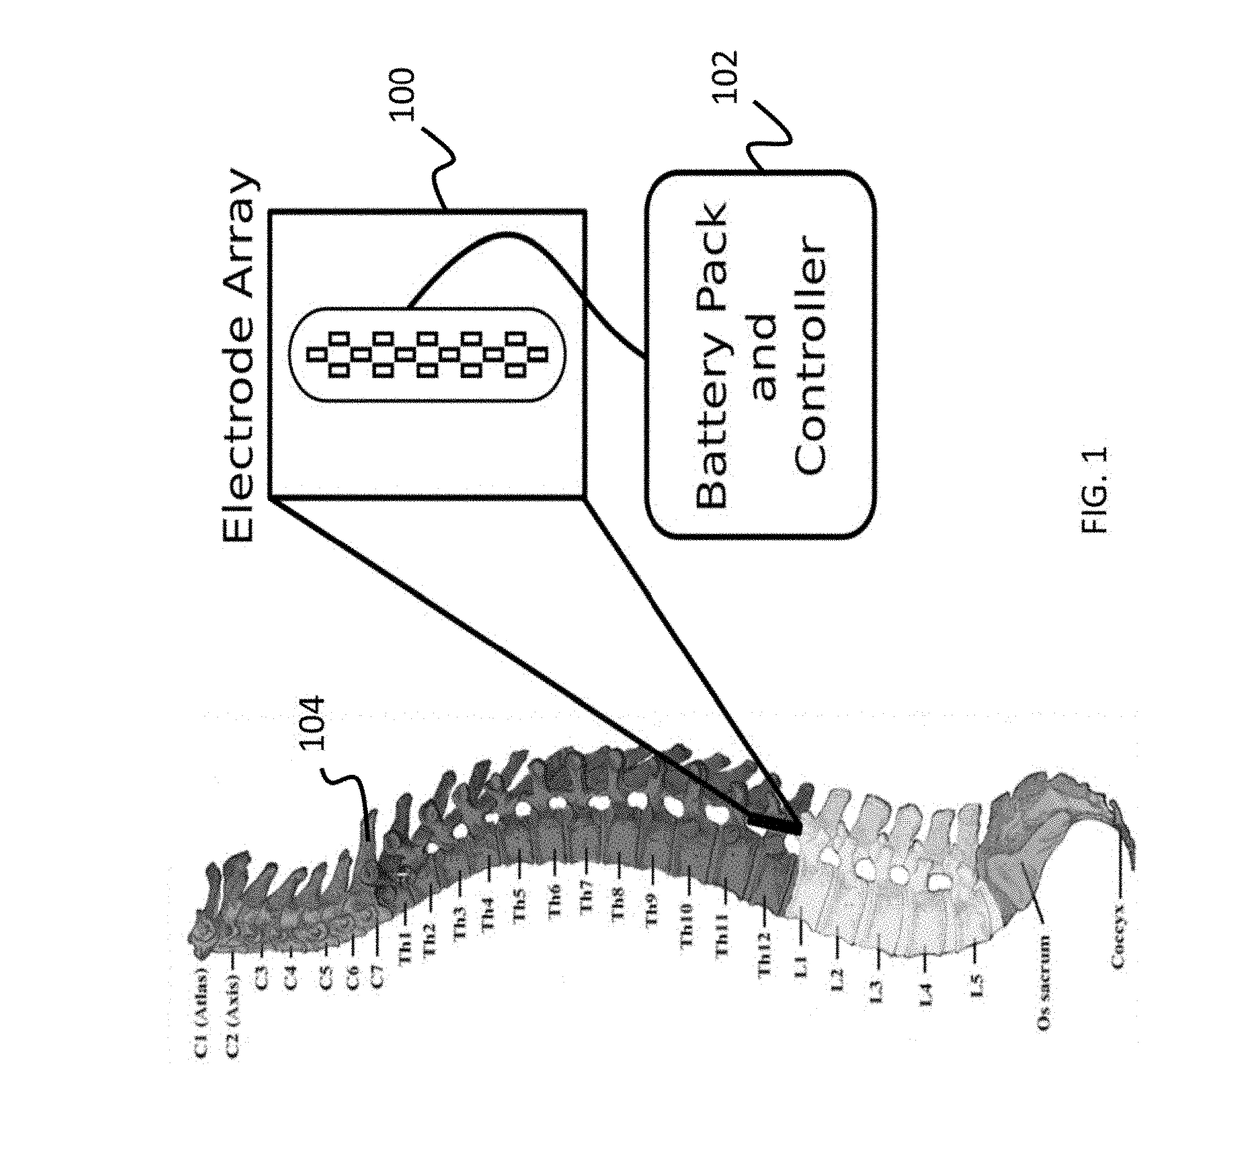 System and method for model-based estimation and control of epidural spinal cord stimulation